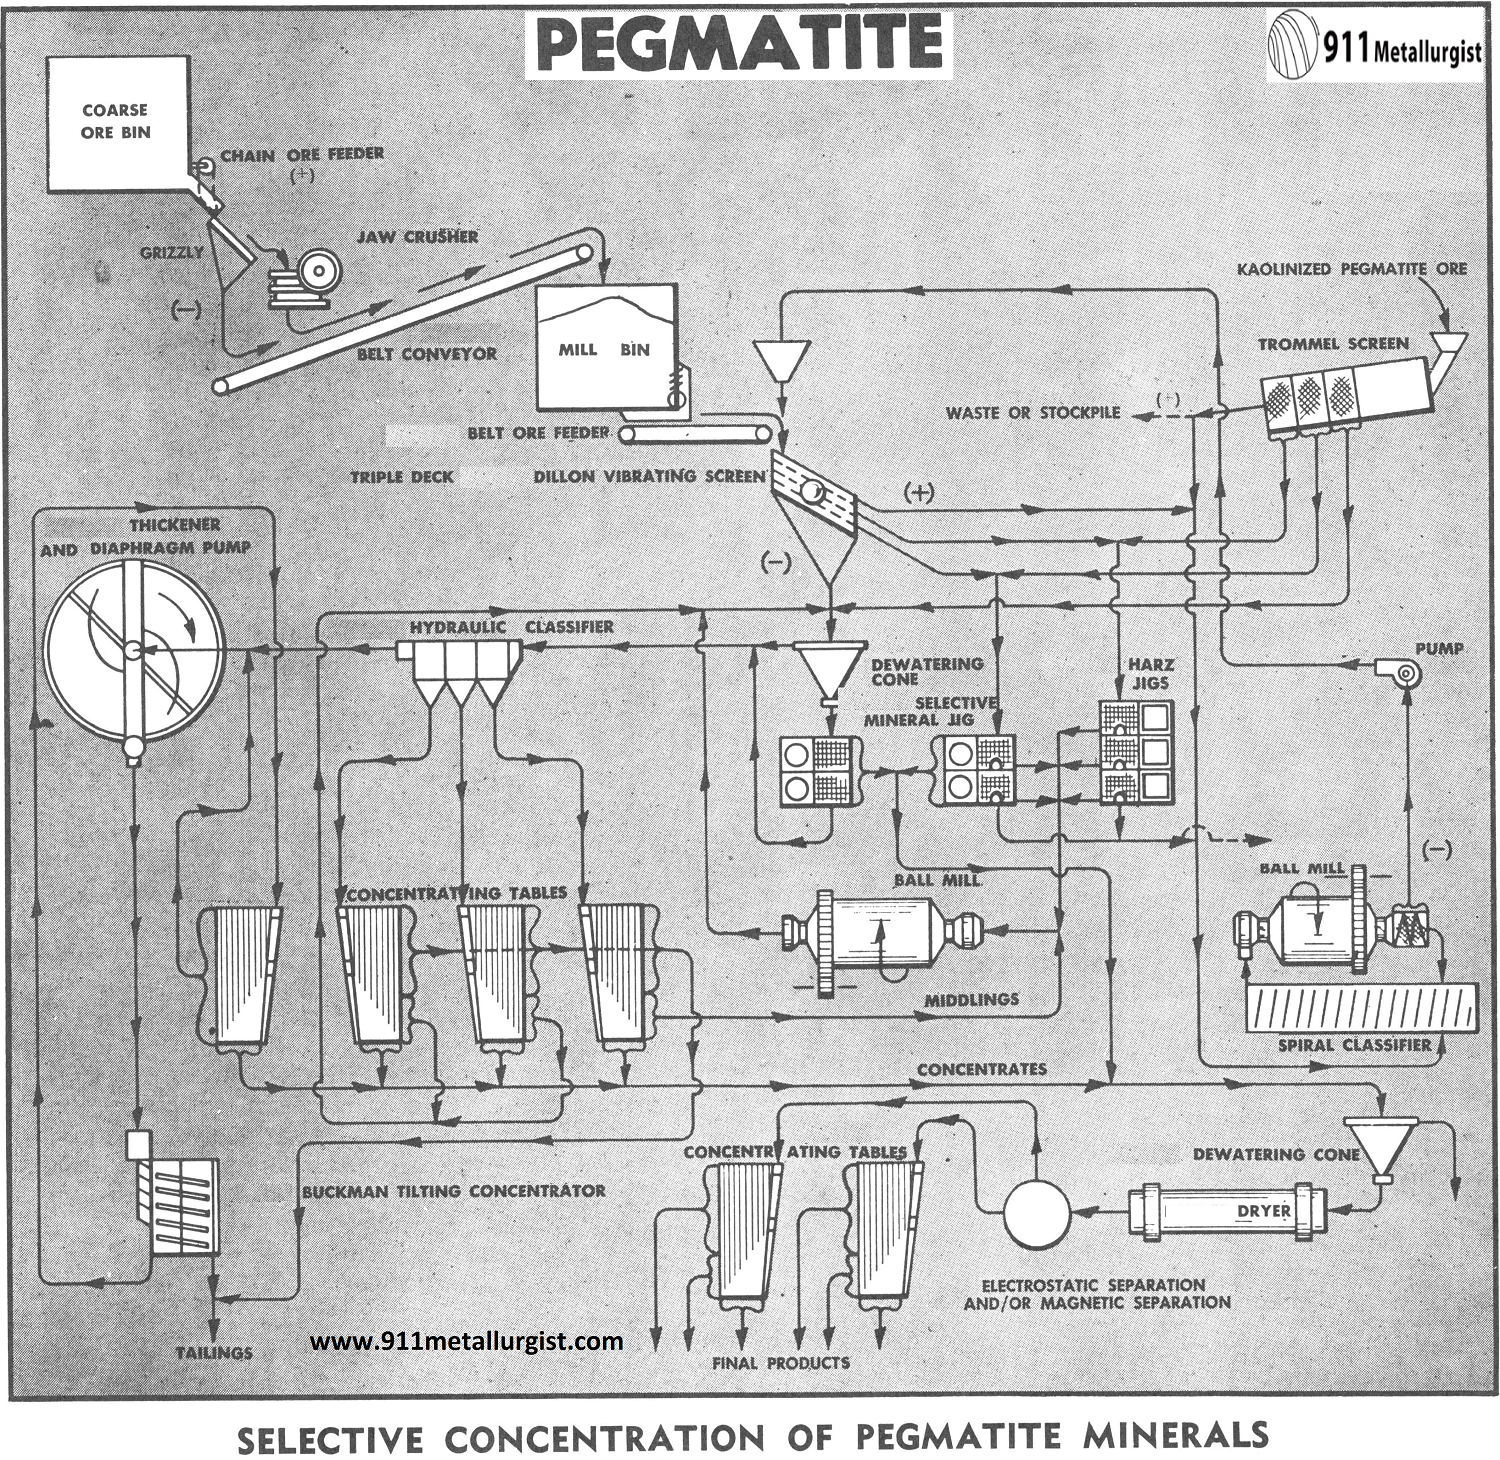 Selective Concentration of Pegmatite Minerals